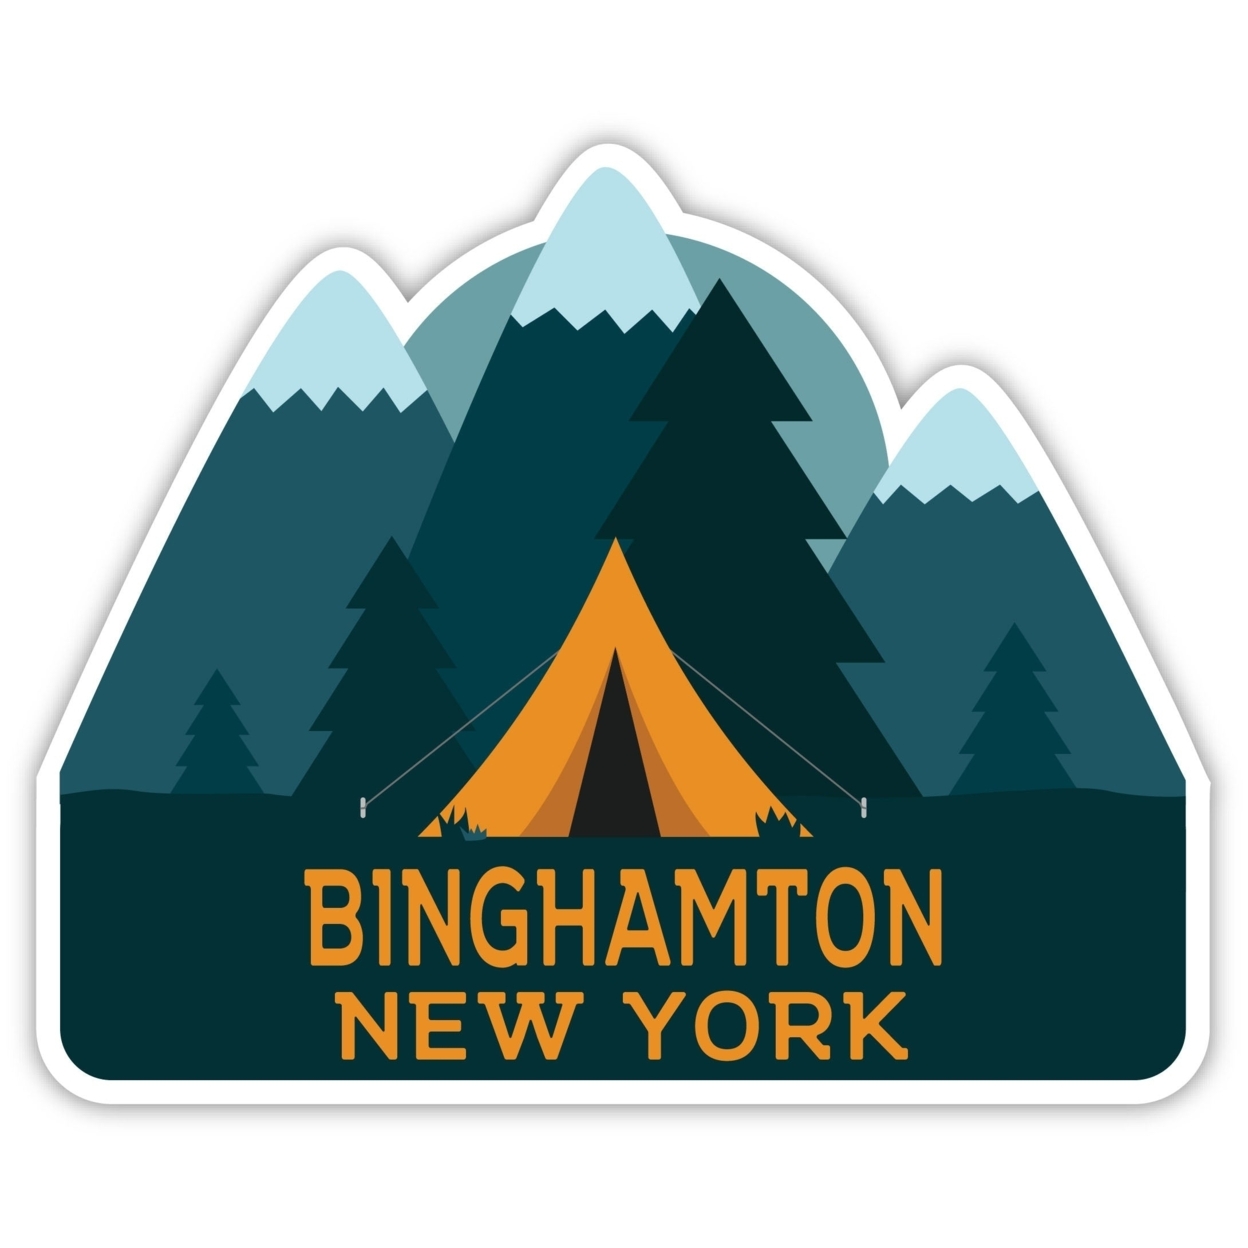 Binghamton New York Souvenir Decorative Stickers (Choose Theme And Size) - 4-Pack, 10-Inch, Tent